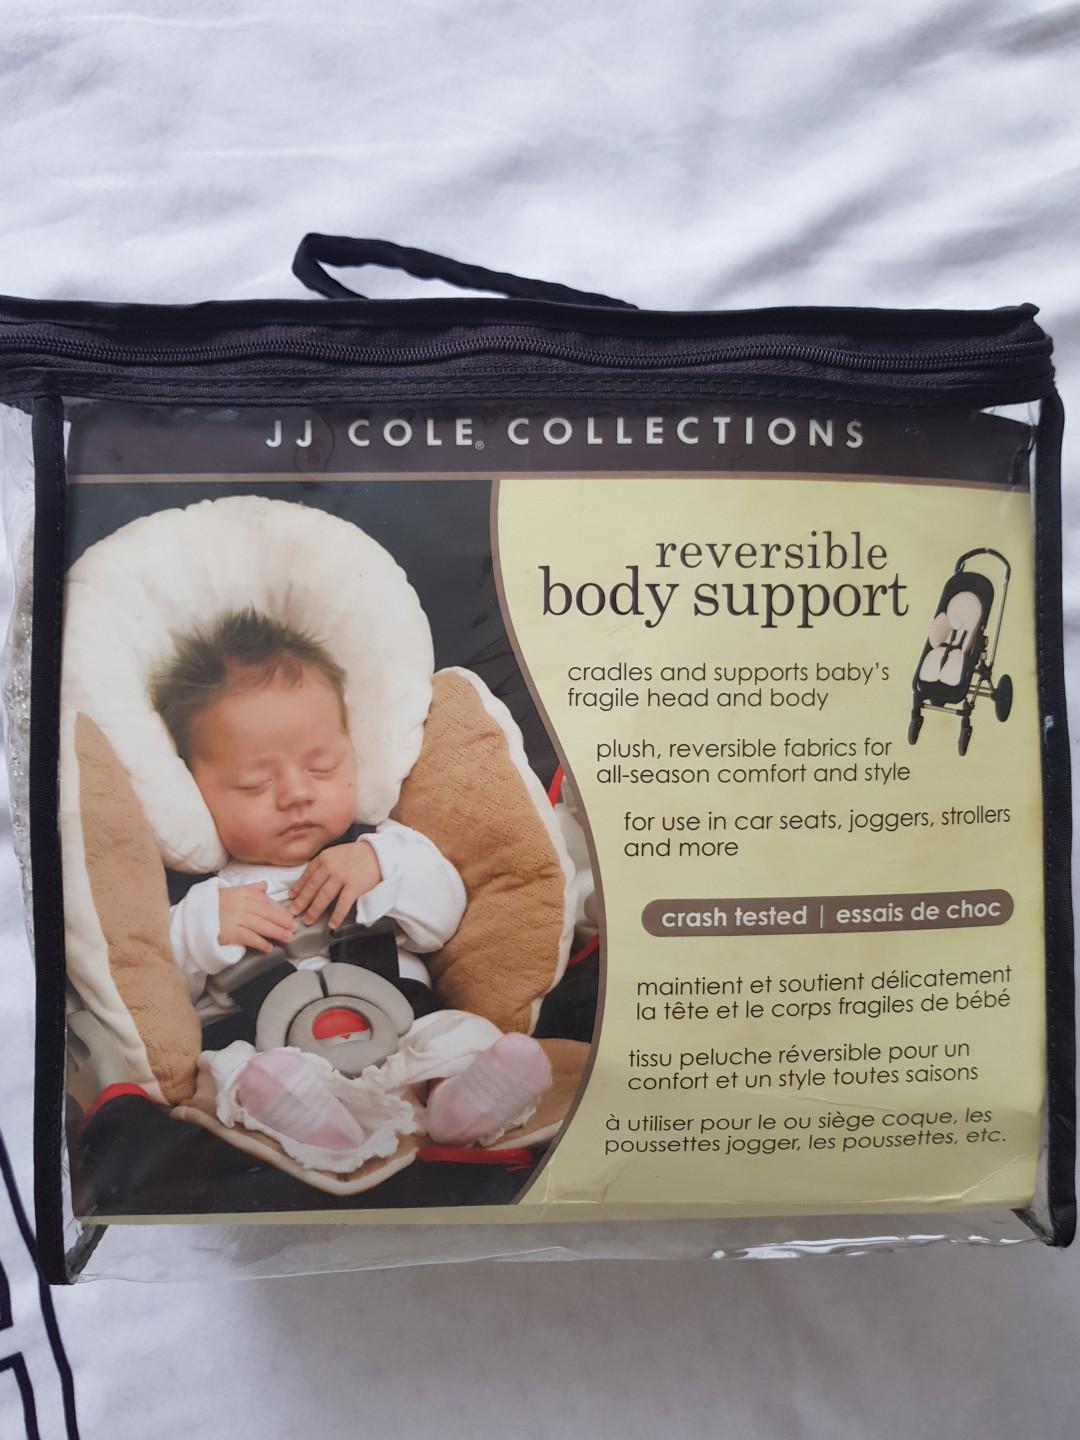 baby jogger seat cover